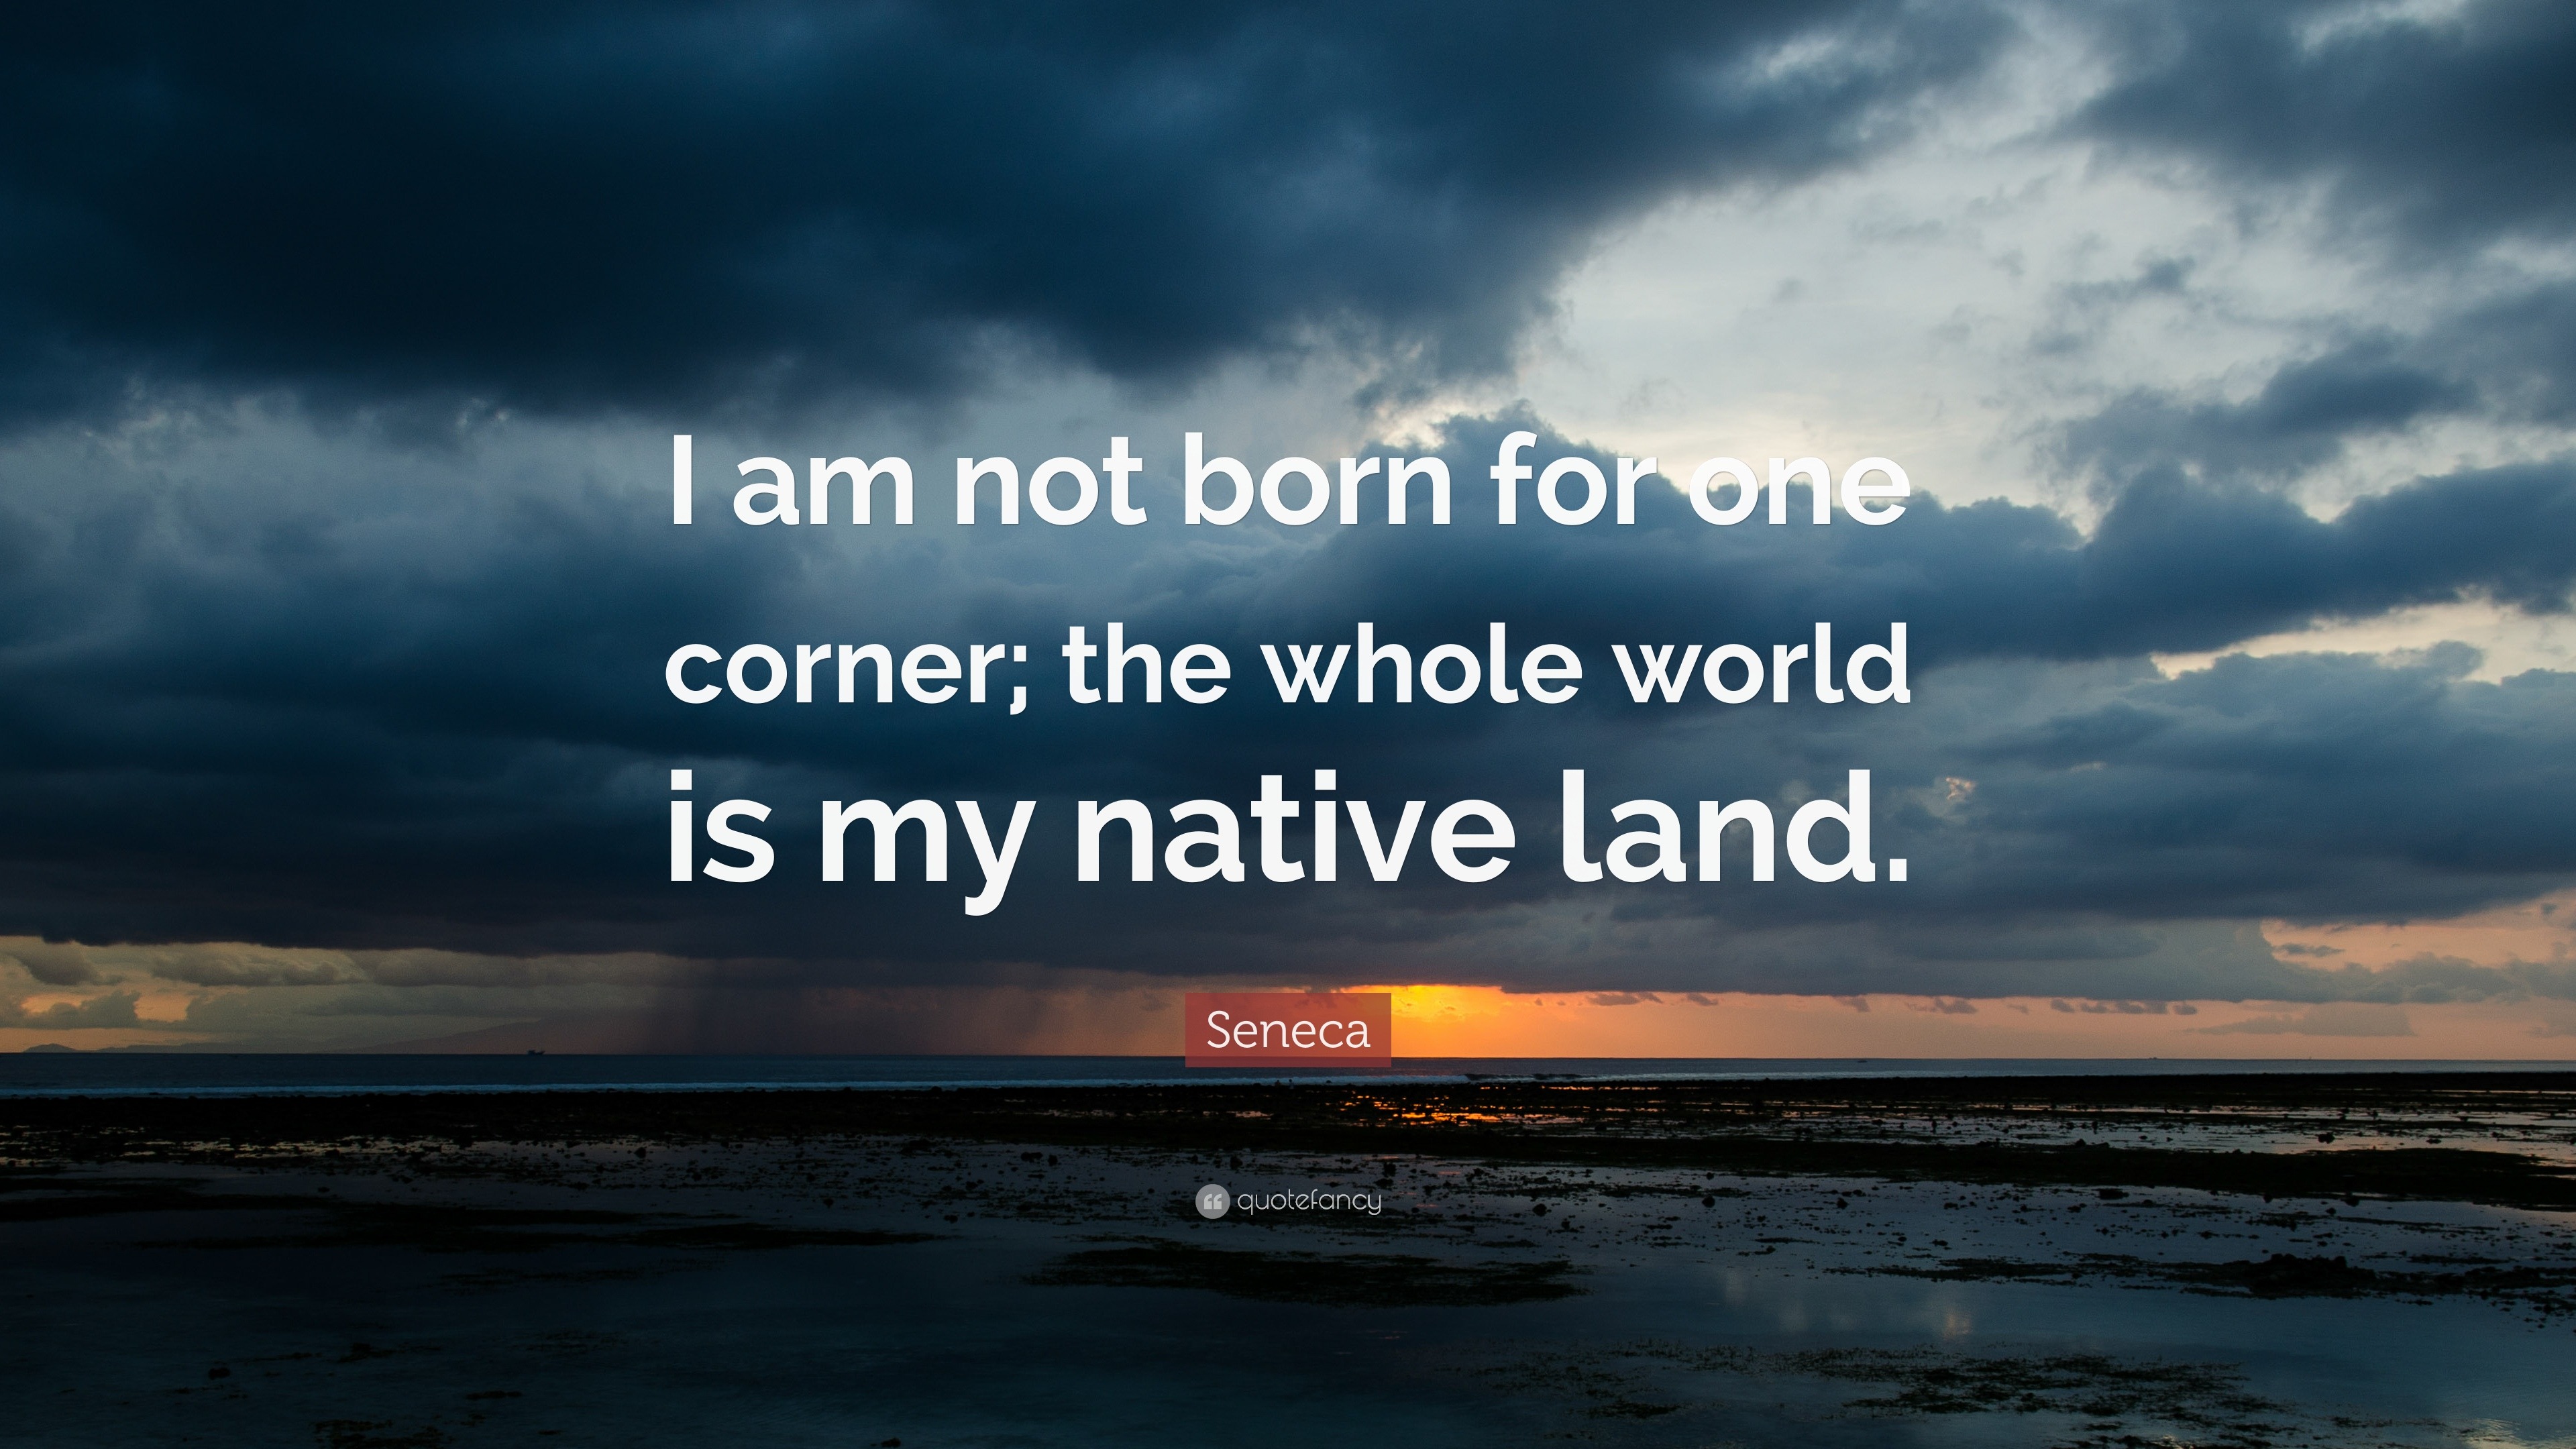 Seneca Quote: “I am not born for one corner; the whole world is my